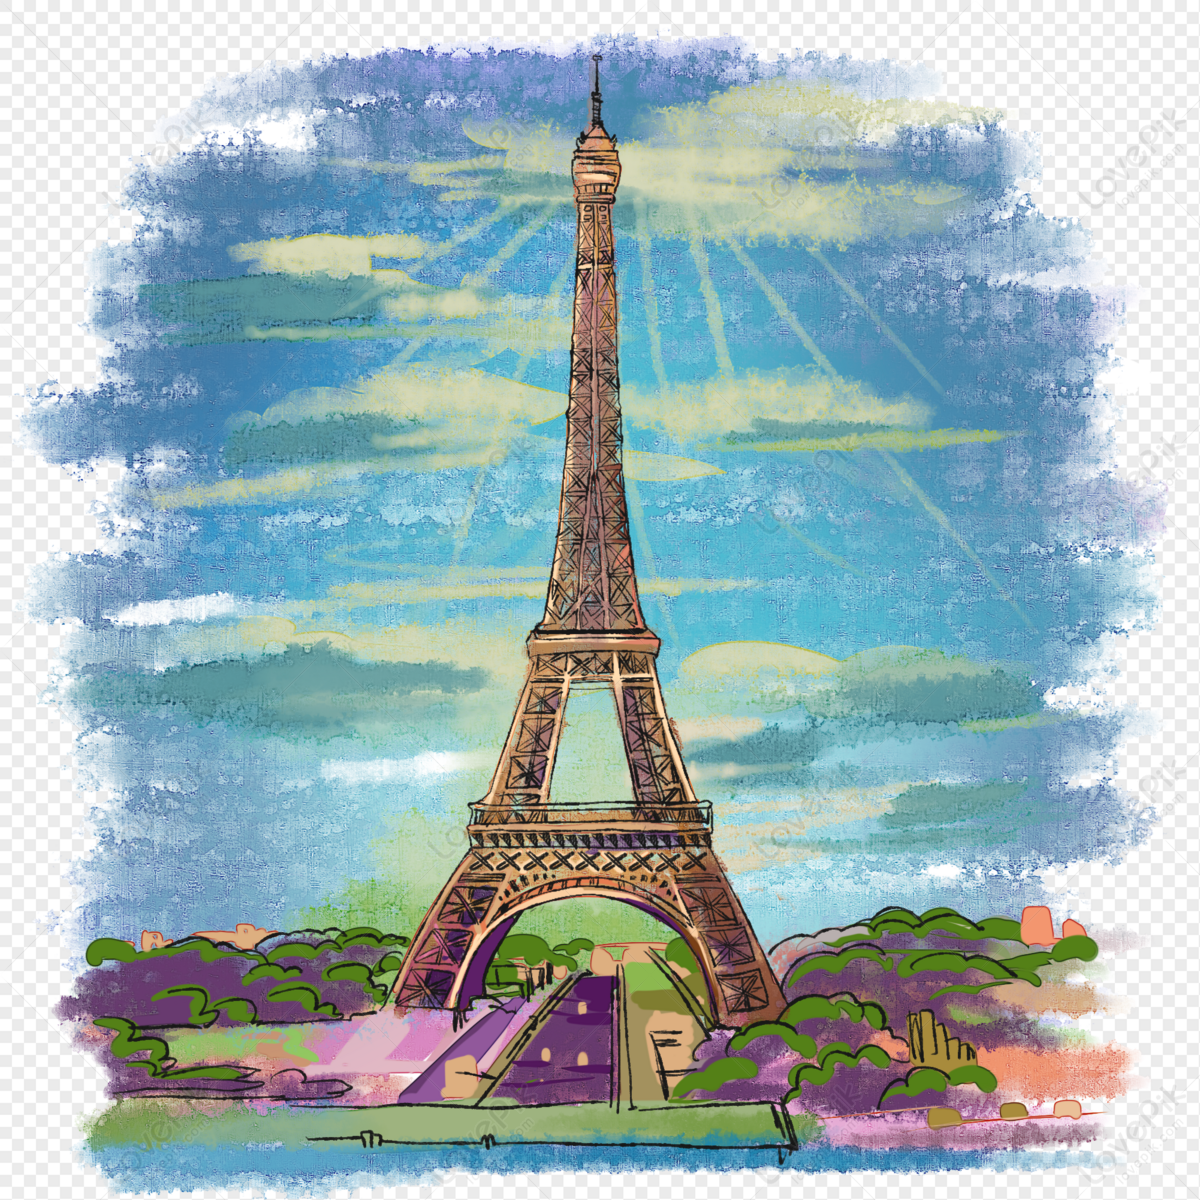 Eiffel tower, france, travel, eiffel tower png free download